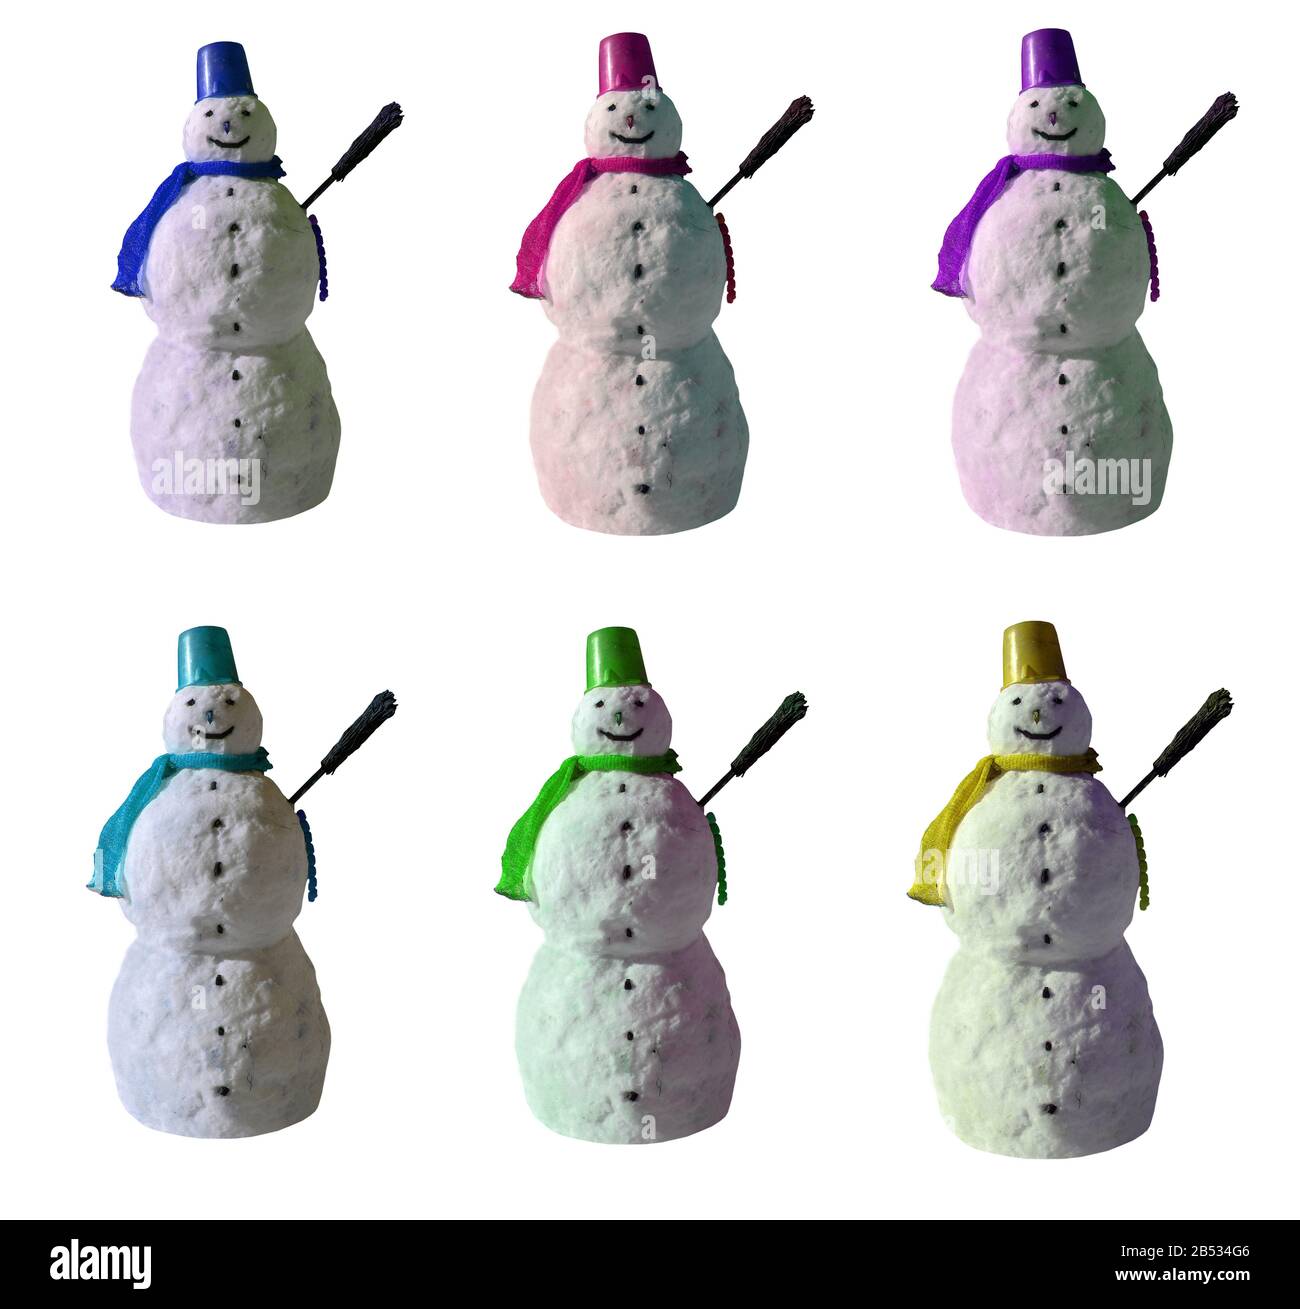 Snowman with purple comforter and bucket in head in different colors Stock Photo